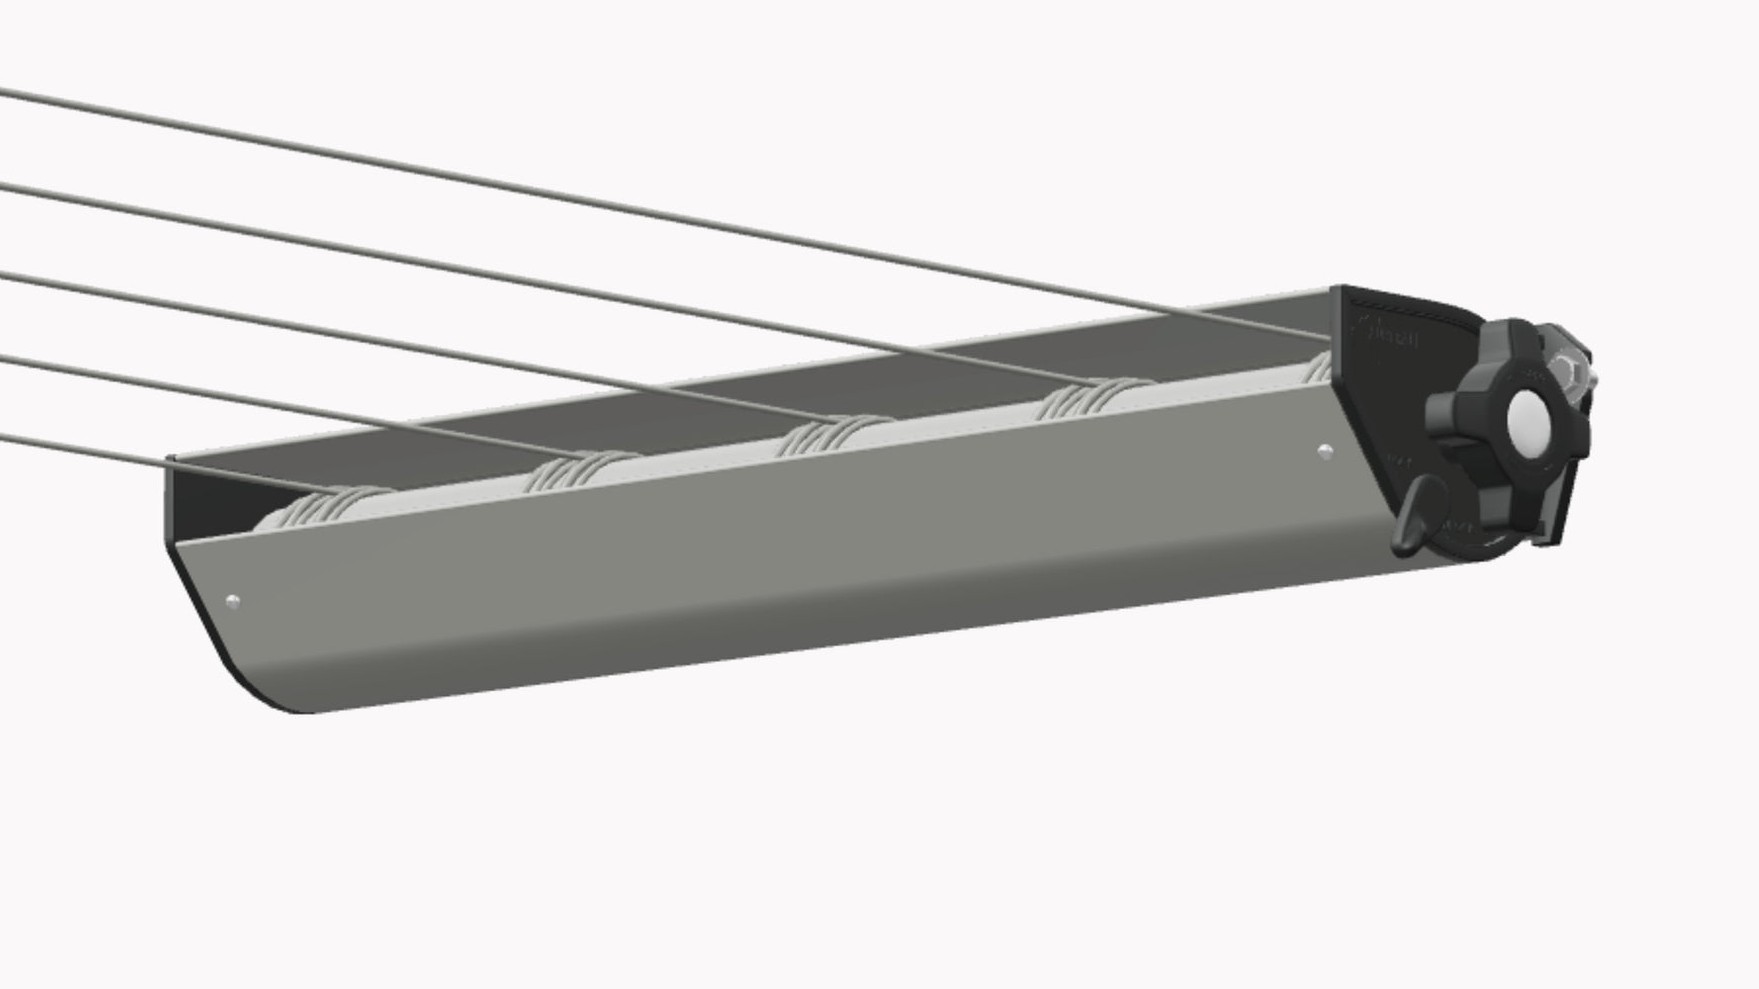 Austral Retractaway 40 Clothesline Design and Build Quality: An Overview